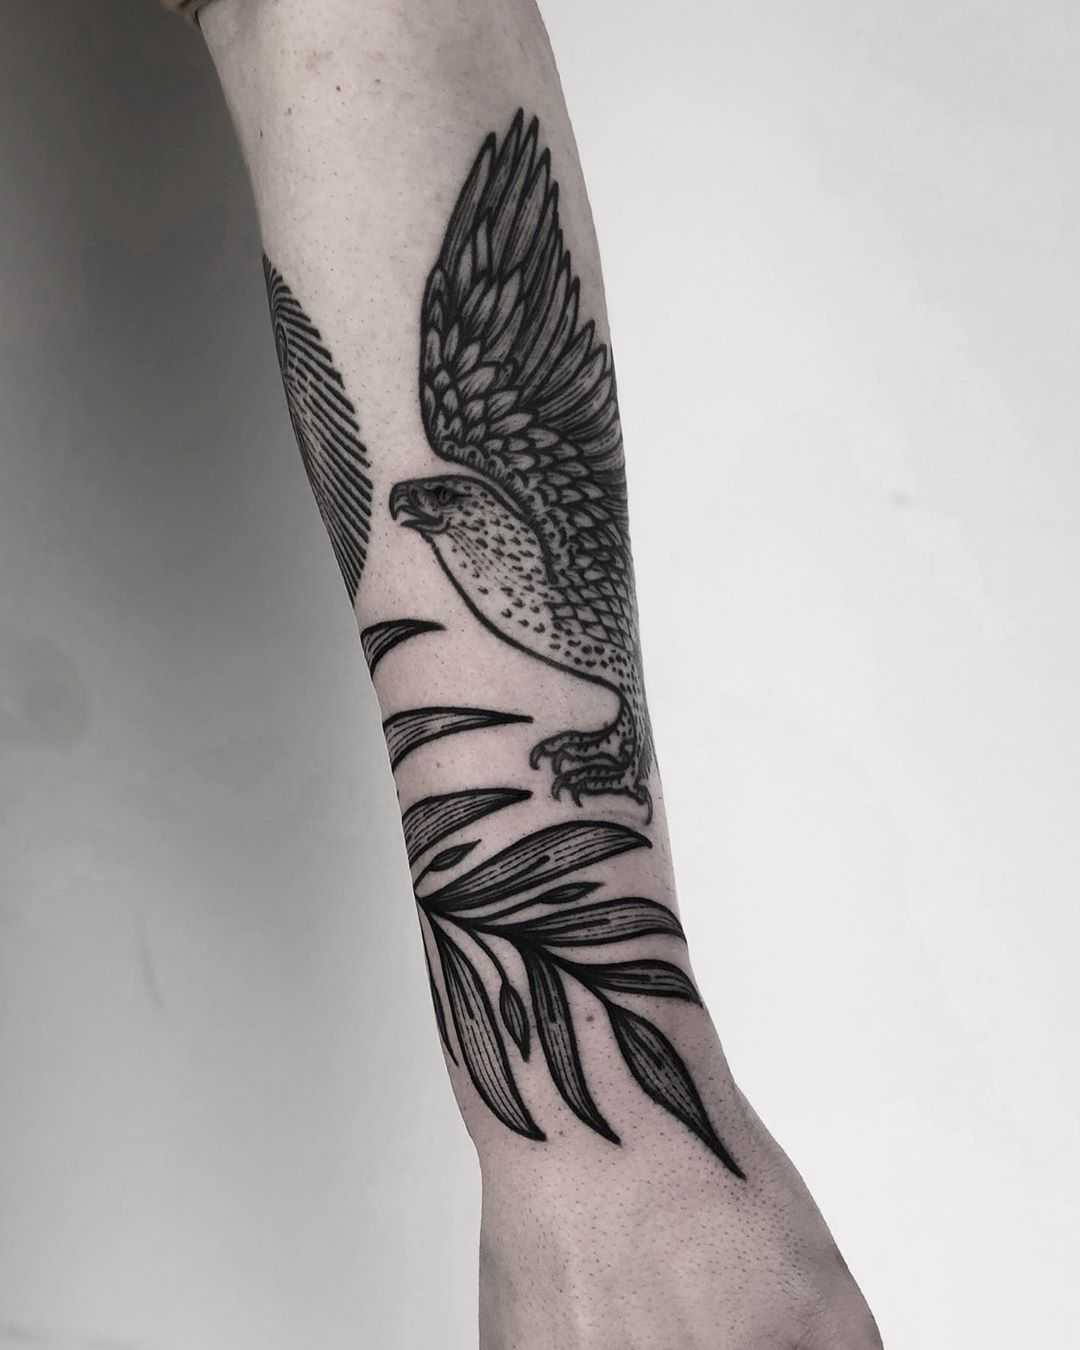 Bird and leaves by tattooist MAIC